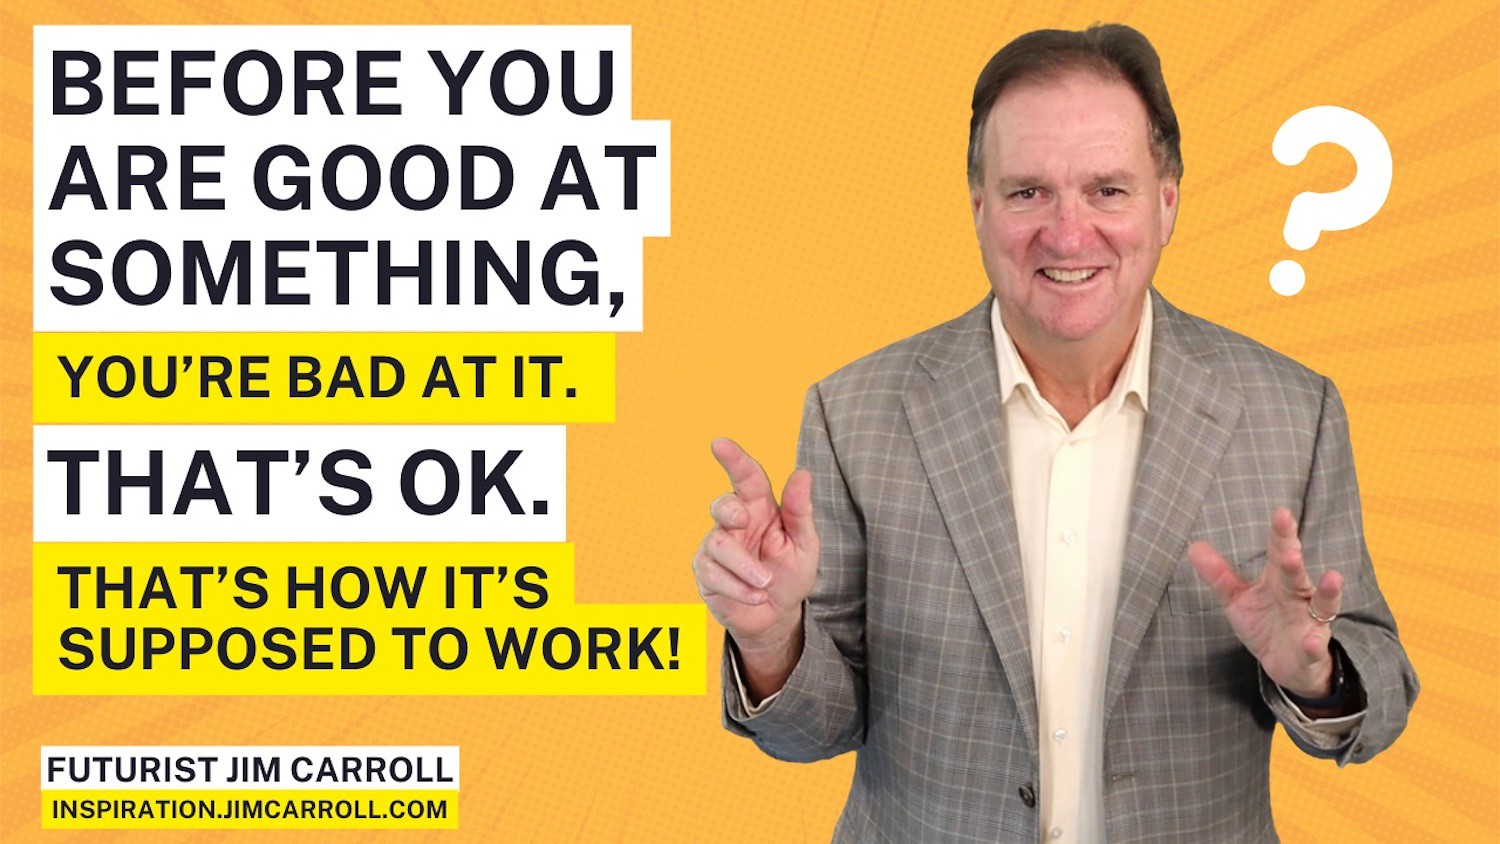 "Before you are good at something, you're bad at it. That's OK. That's how it's supposed to work!" - Futurist Jim Carroll